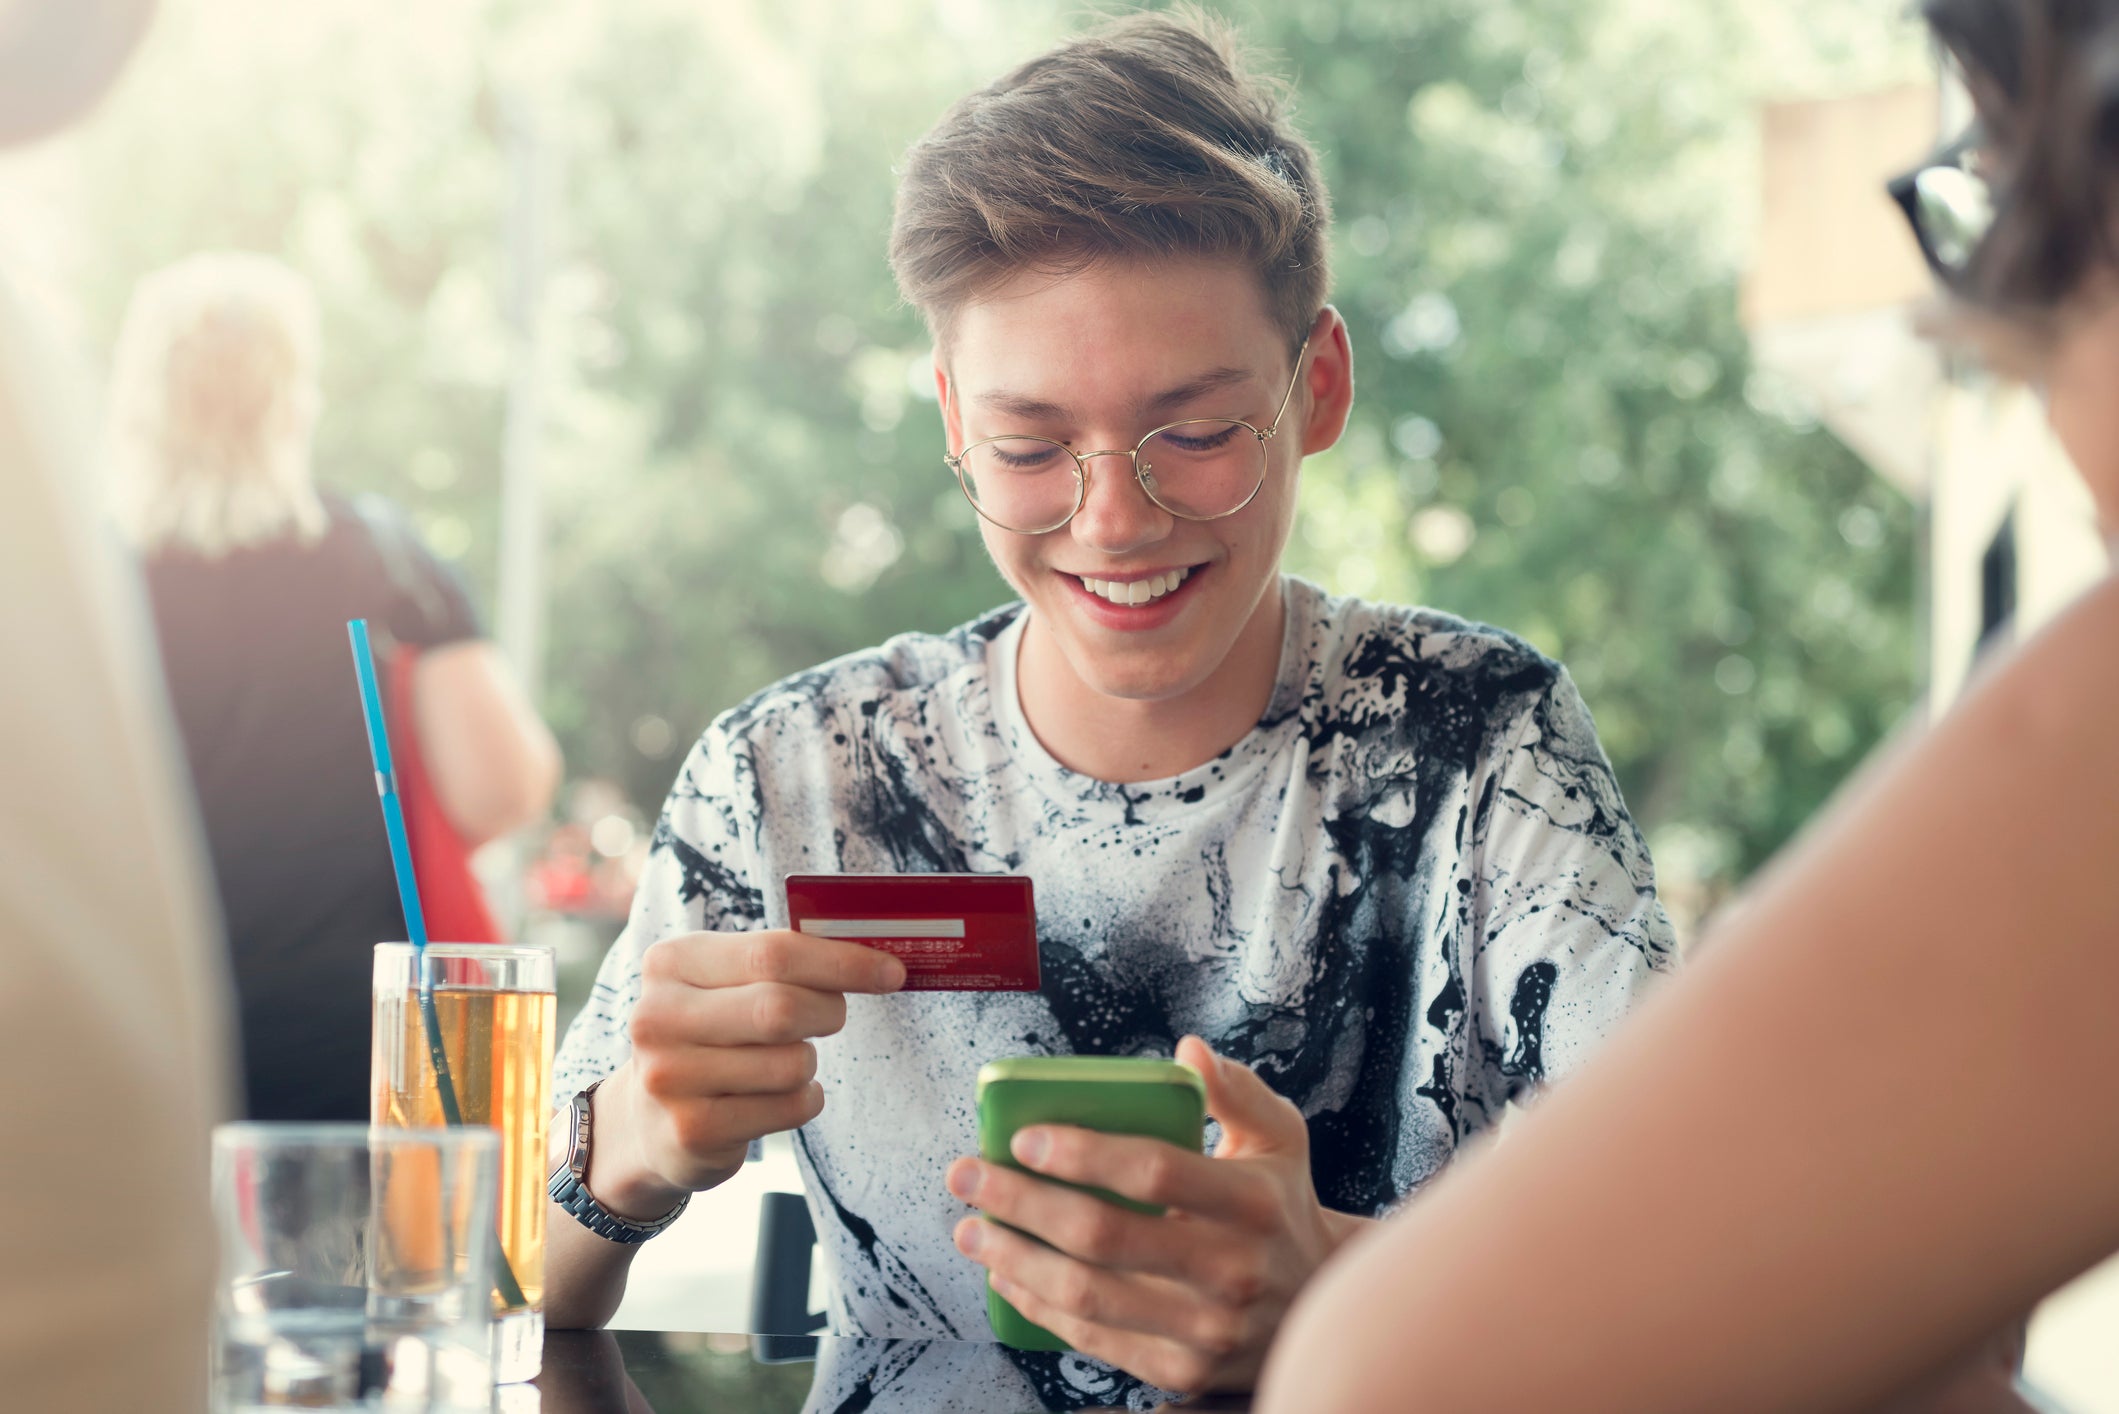 A teenager with short hair and glasses smiles while holding a credit card and mobile phone at a table at a restaurant